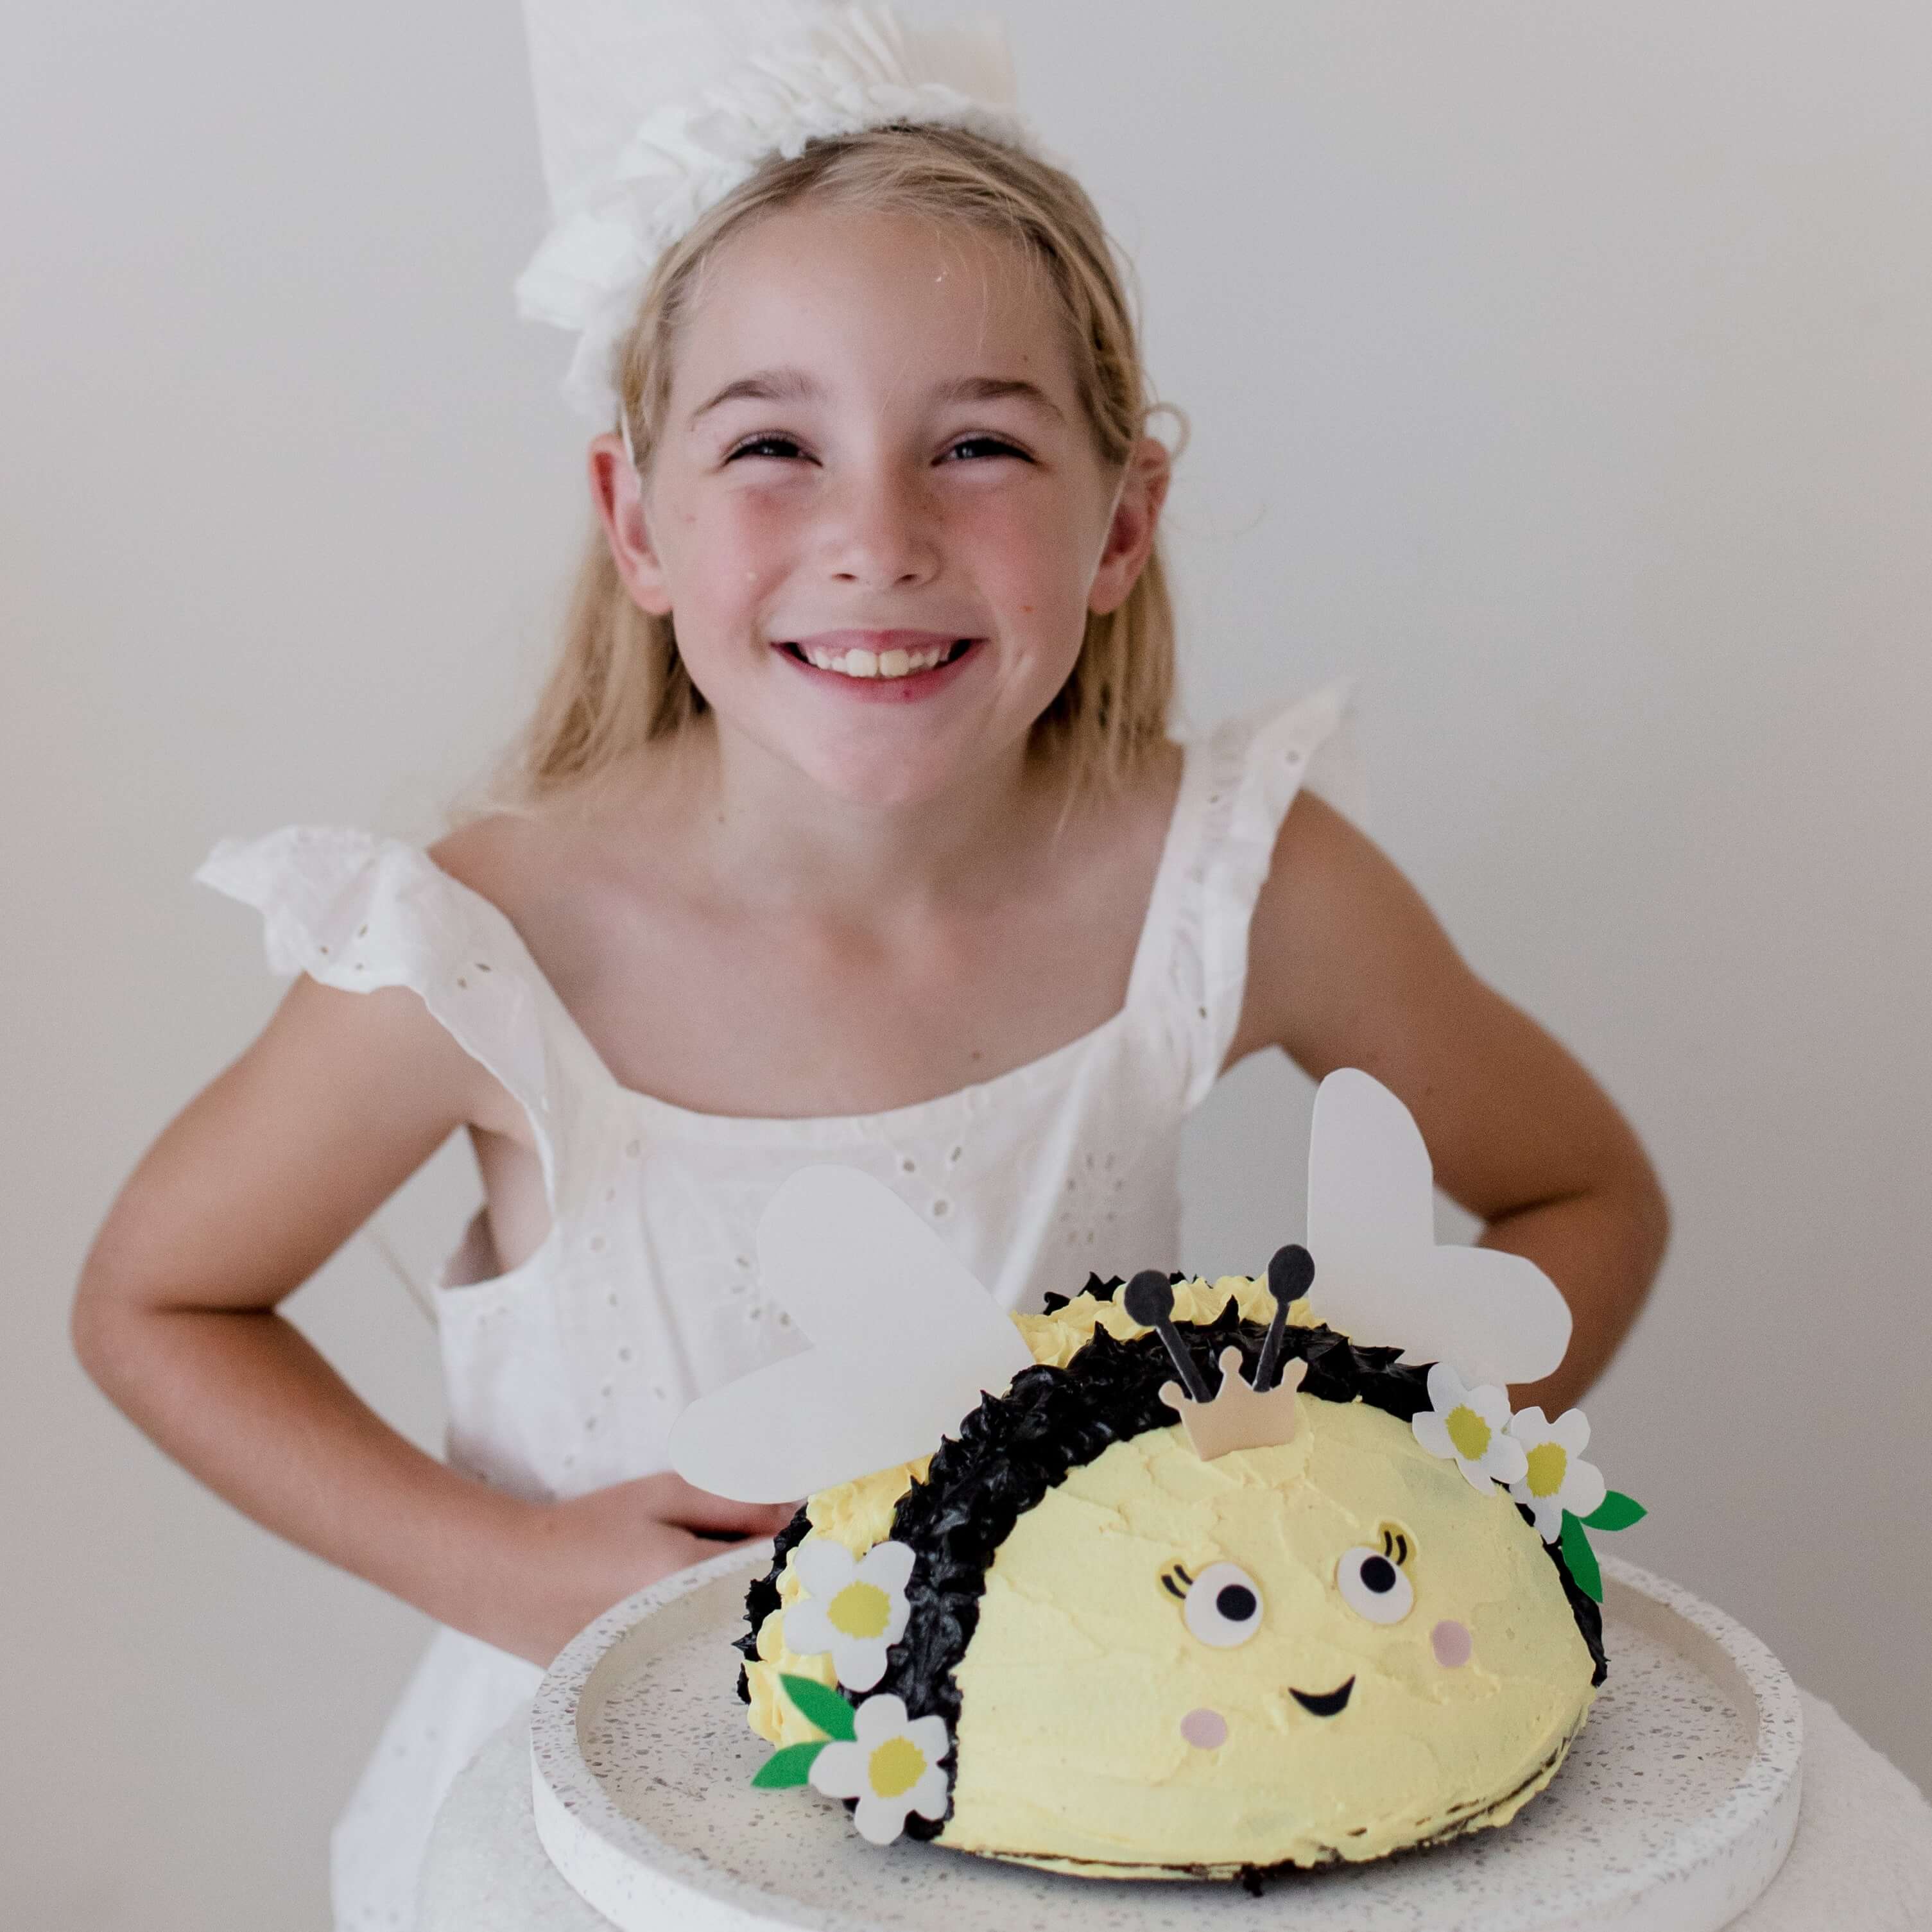 Honey Comb and Bumble Bees Cake | Freedom Bakery